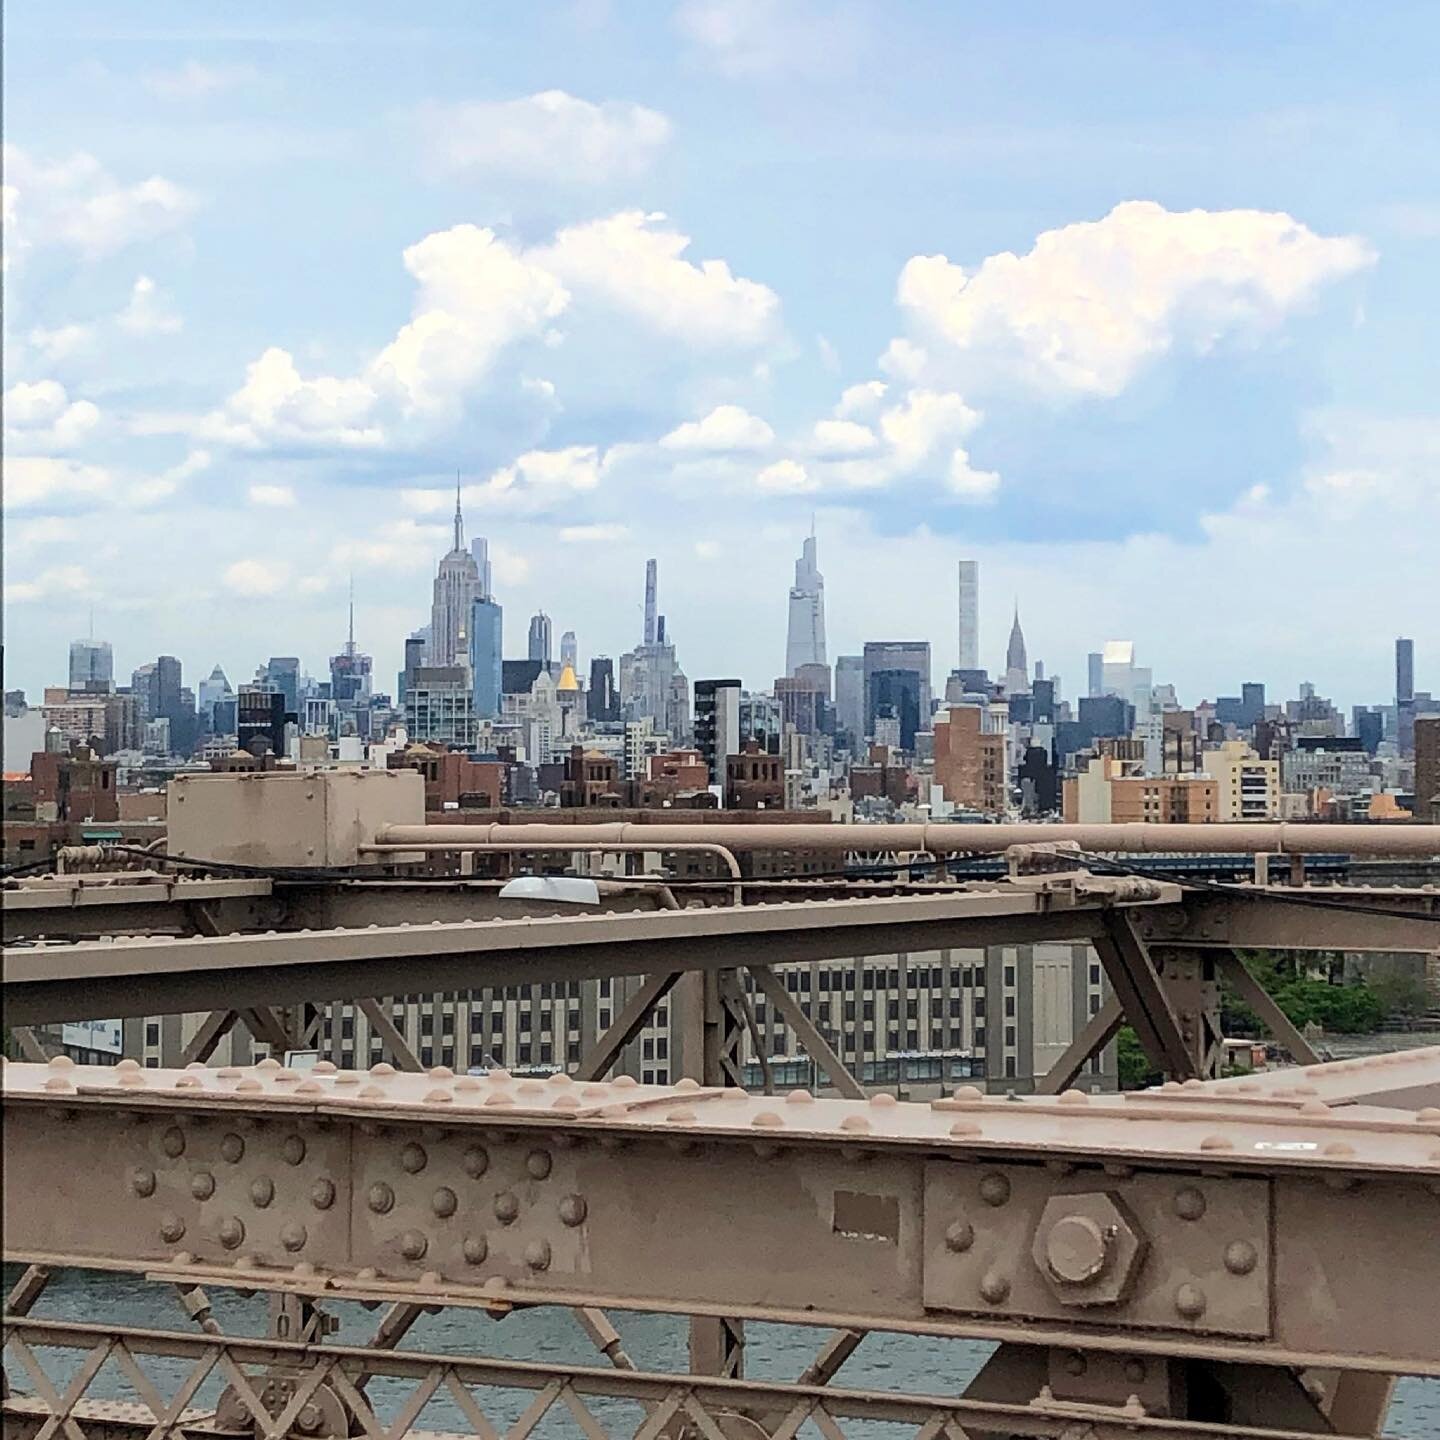 #Midtown #skyline from the #BrooklynBridge on a Sunday afternoon. #NewYorker #tourguide #takingawalk Come visit NYC and take a #Brooklyn to #Manhattan #walkingtour with me, and I&rsquo;ll show you! 🗣🗽🙌🌉🏙